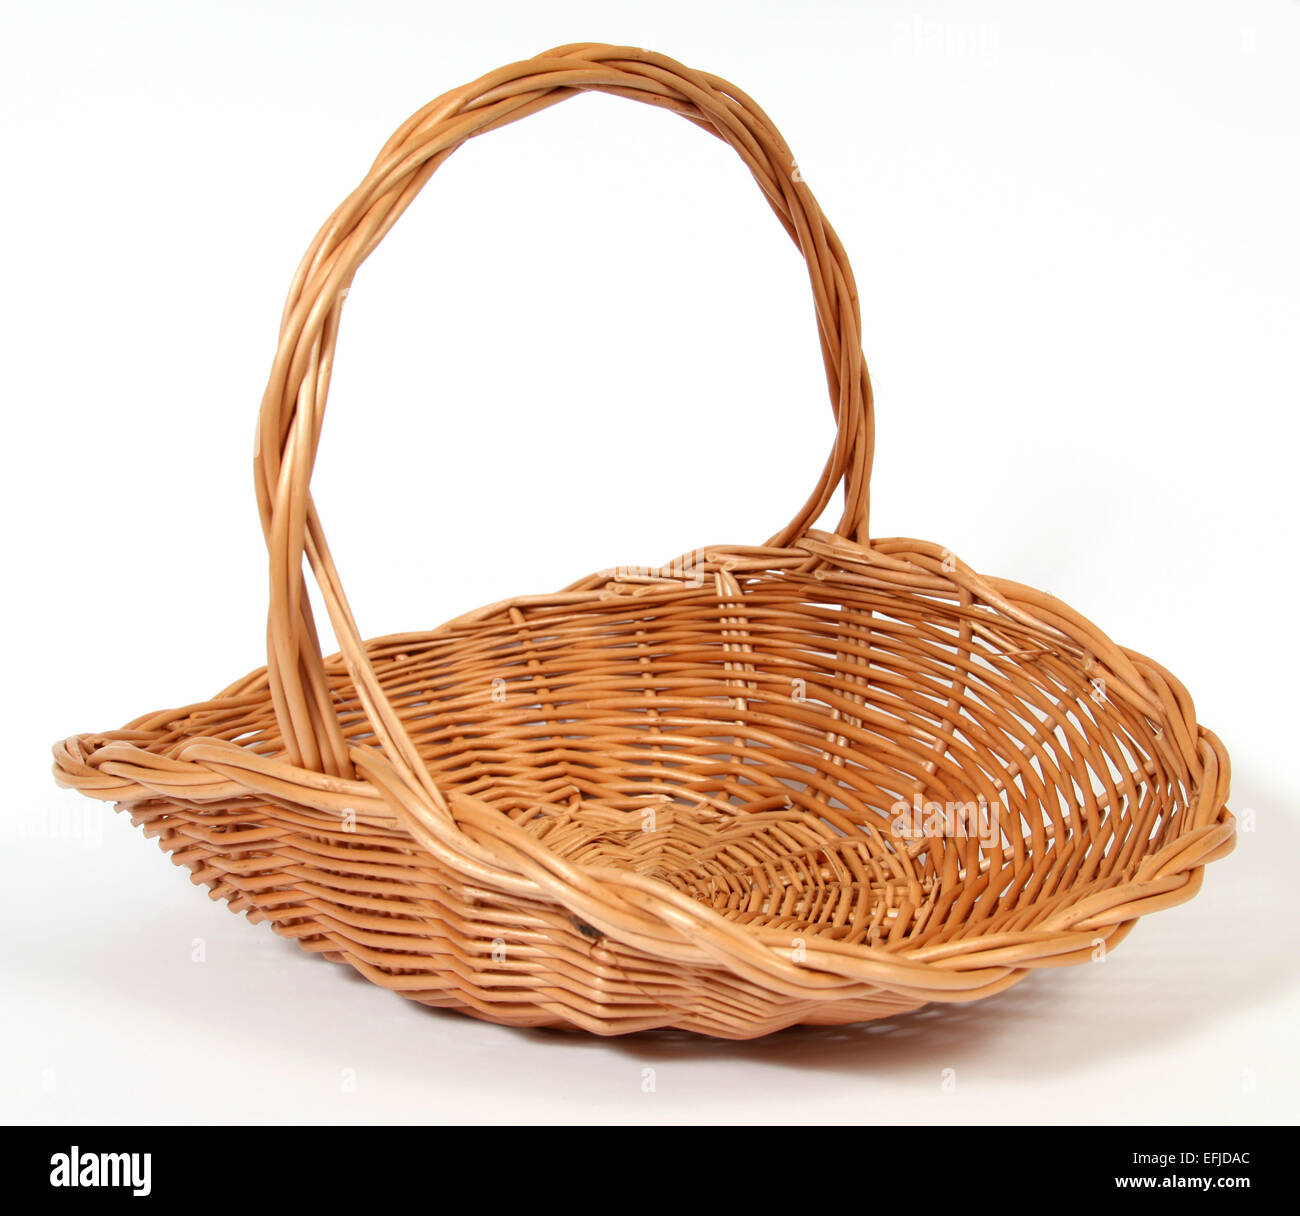 The empty Easter basket Stock Photo - Alamy